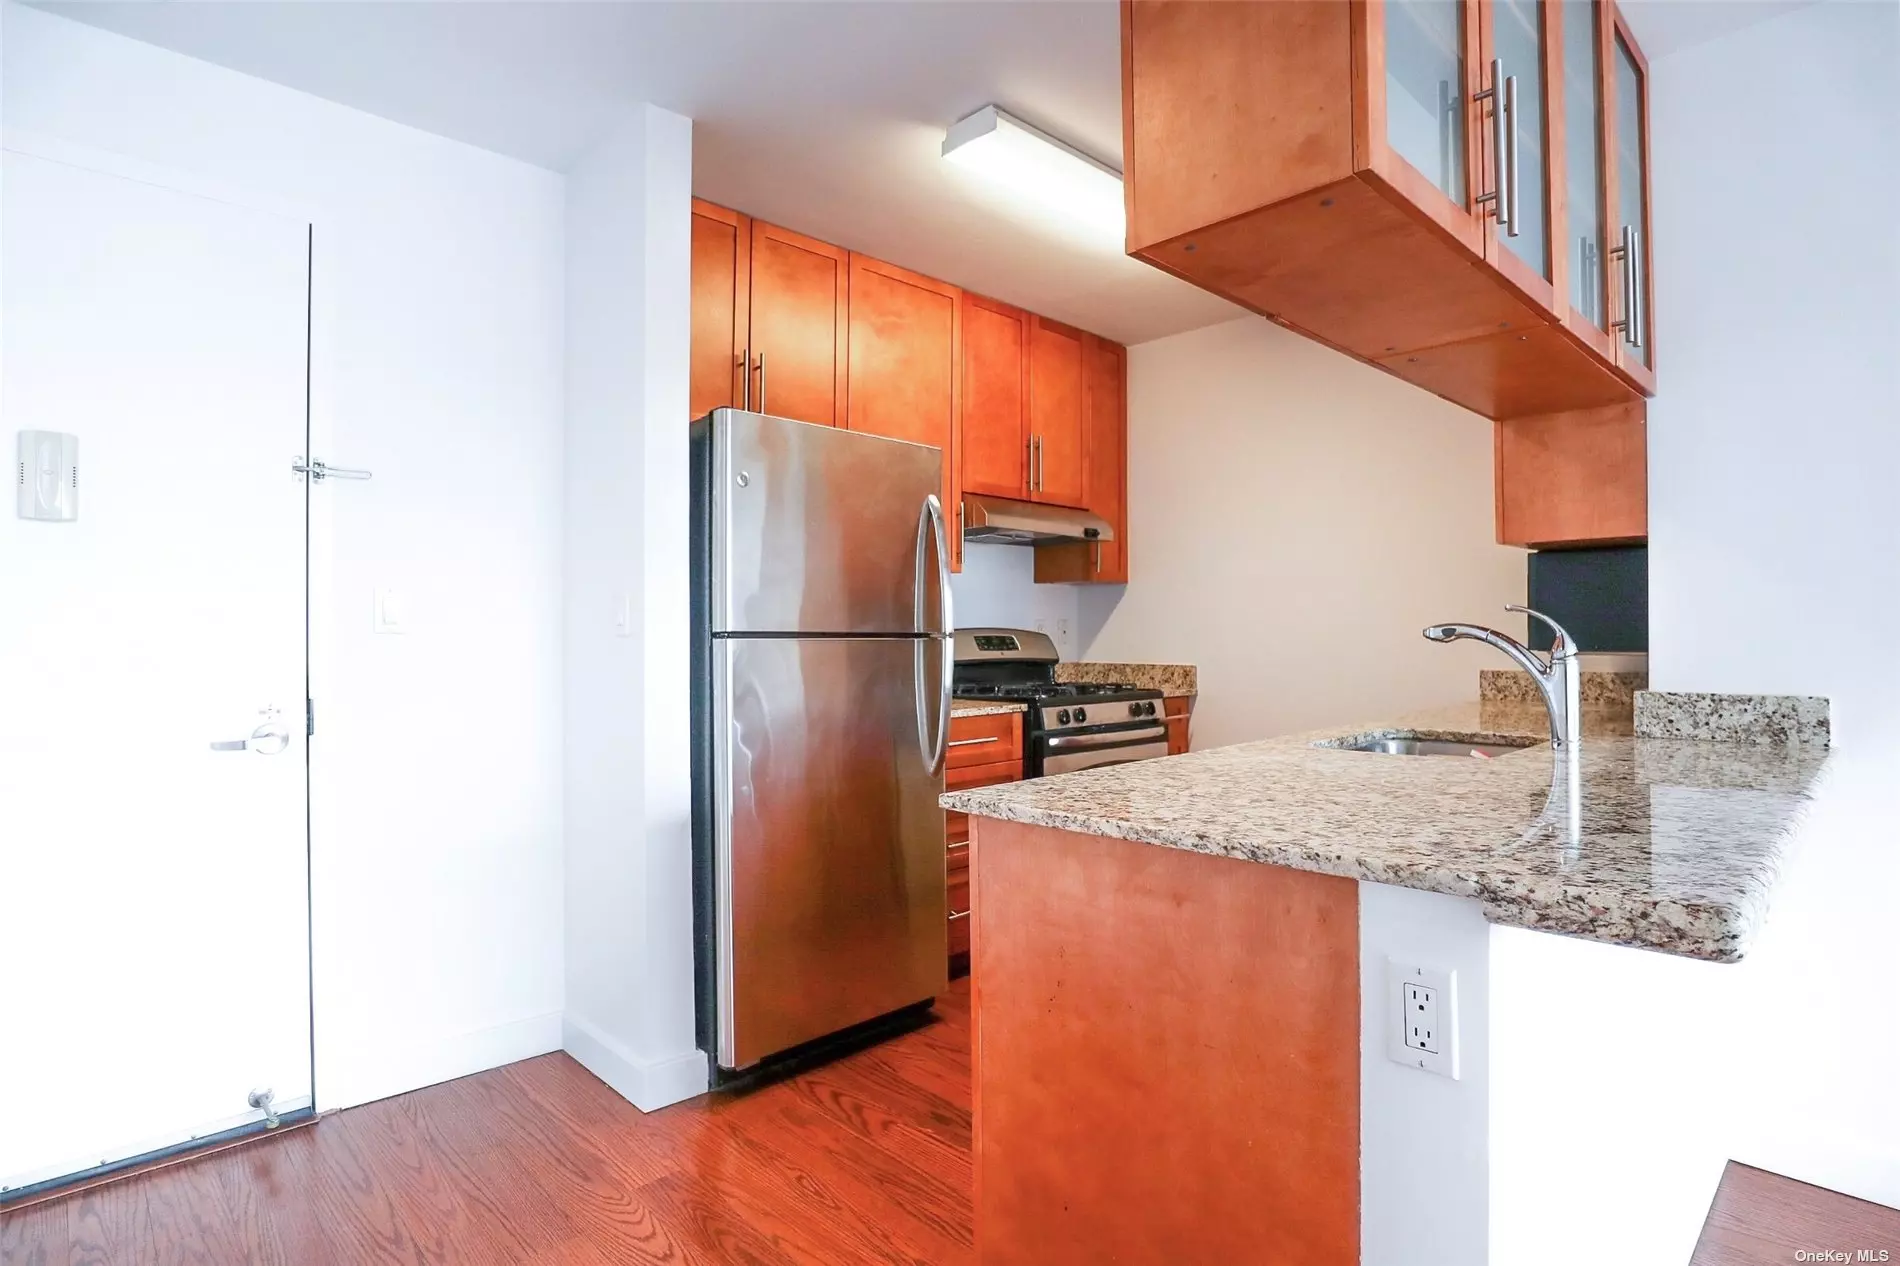 Beautiful one bedroom with a balcony located at sky view Parc complex. Unit Features: 9&rsquo; Ceiling, Oversized Soundproof Windows, Large Kitchen, With Stainless Steel Appliances (D/W, Microwave, Range Hood Vented Outside The Building), Granite Counter Tops, Washer/Dryer In The Unit.